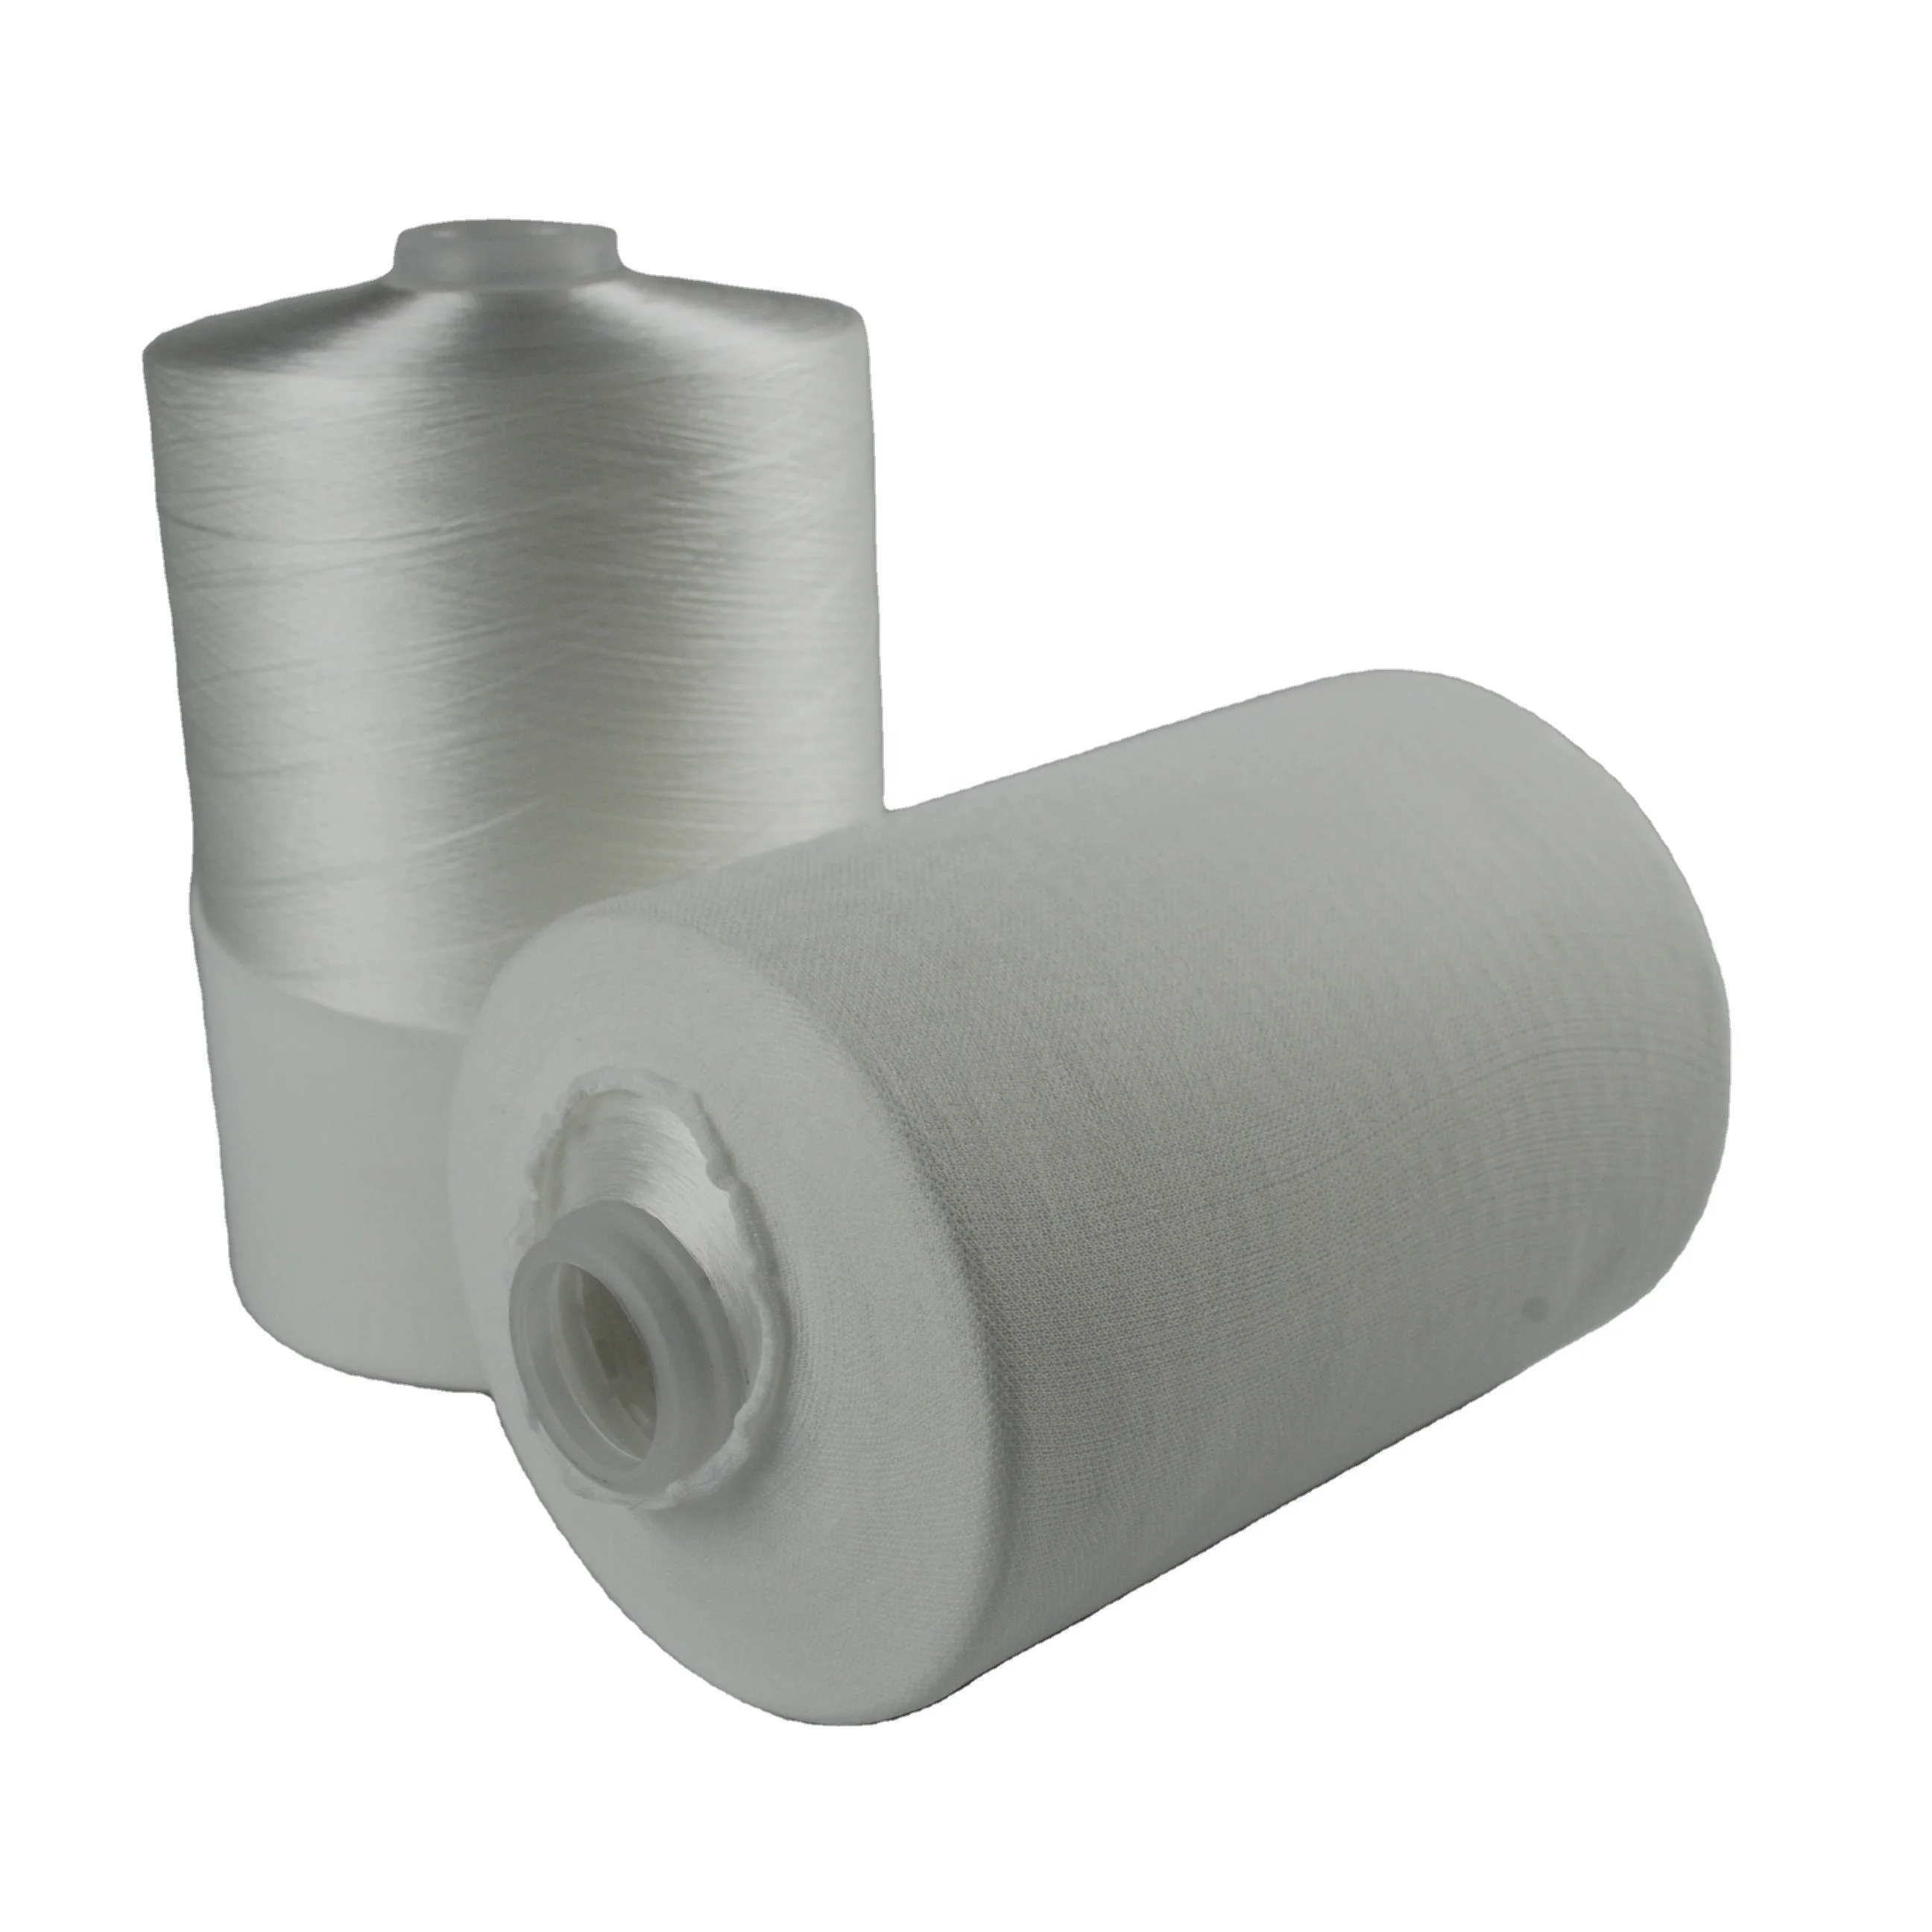 210d 3 polyester sewing thread Bonded sewing thread for mattress